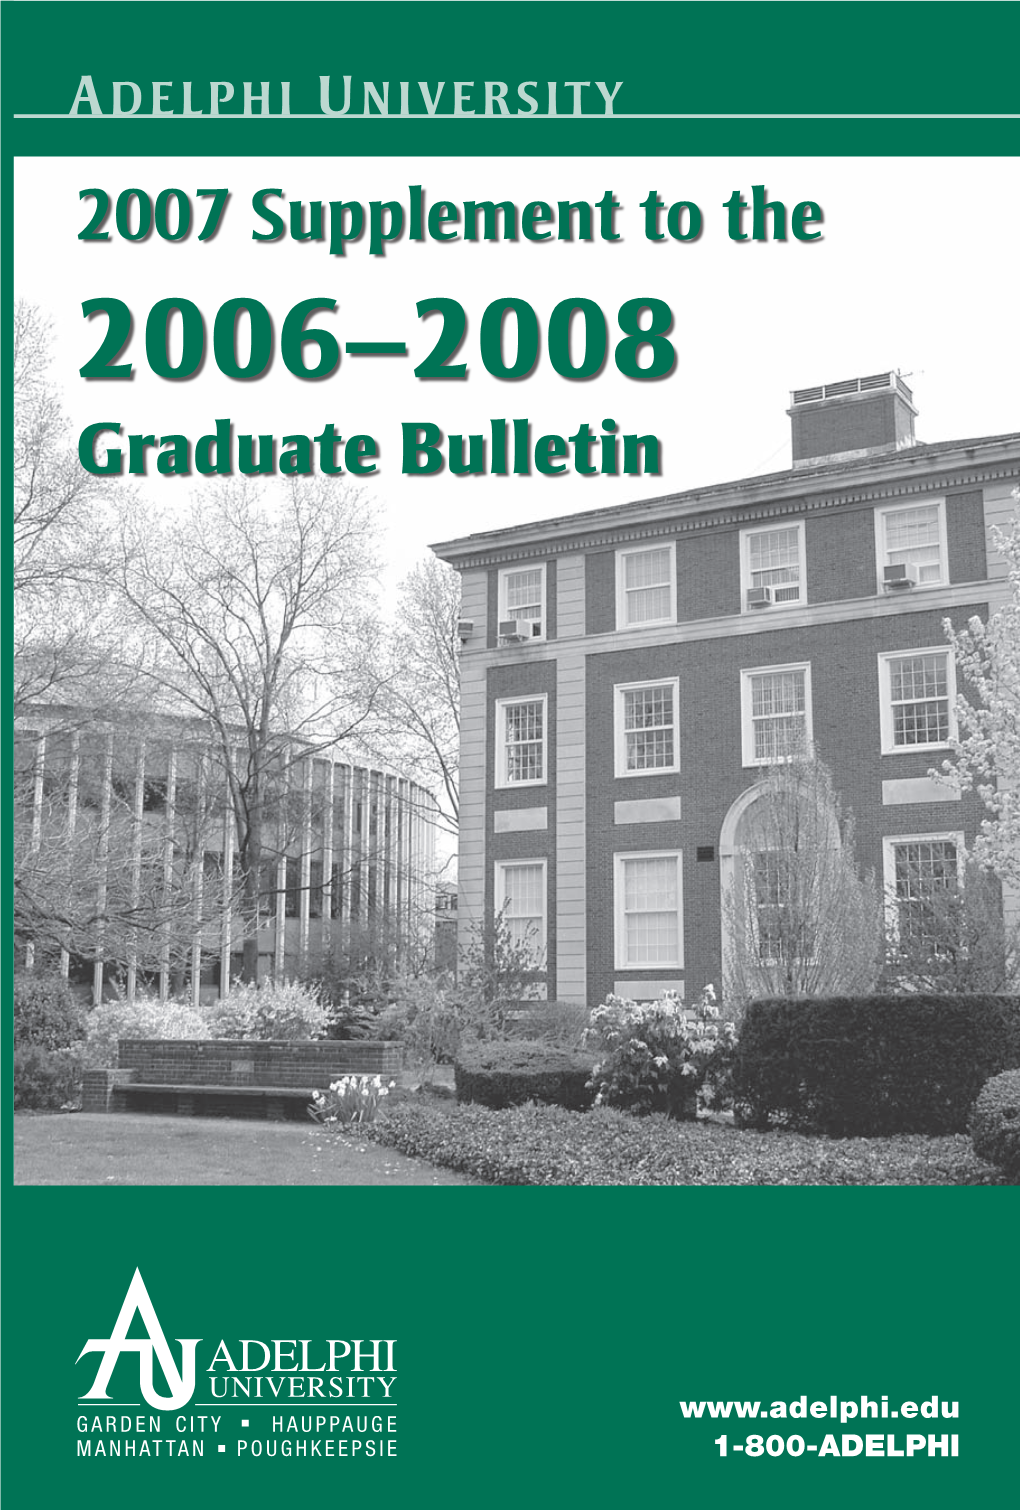 2007 Supplement to the Graduate Bulletin